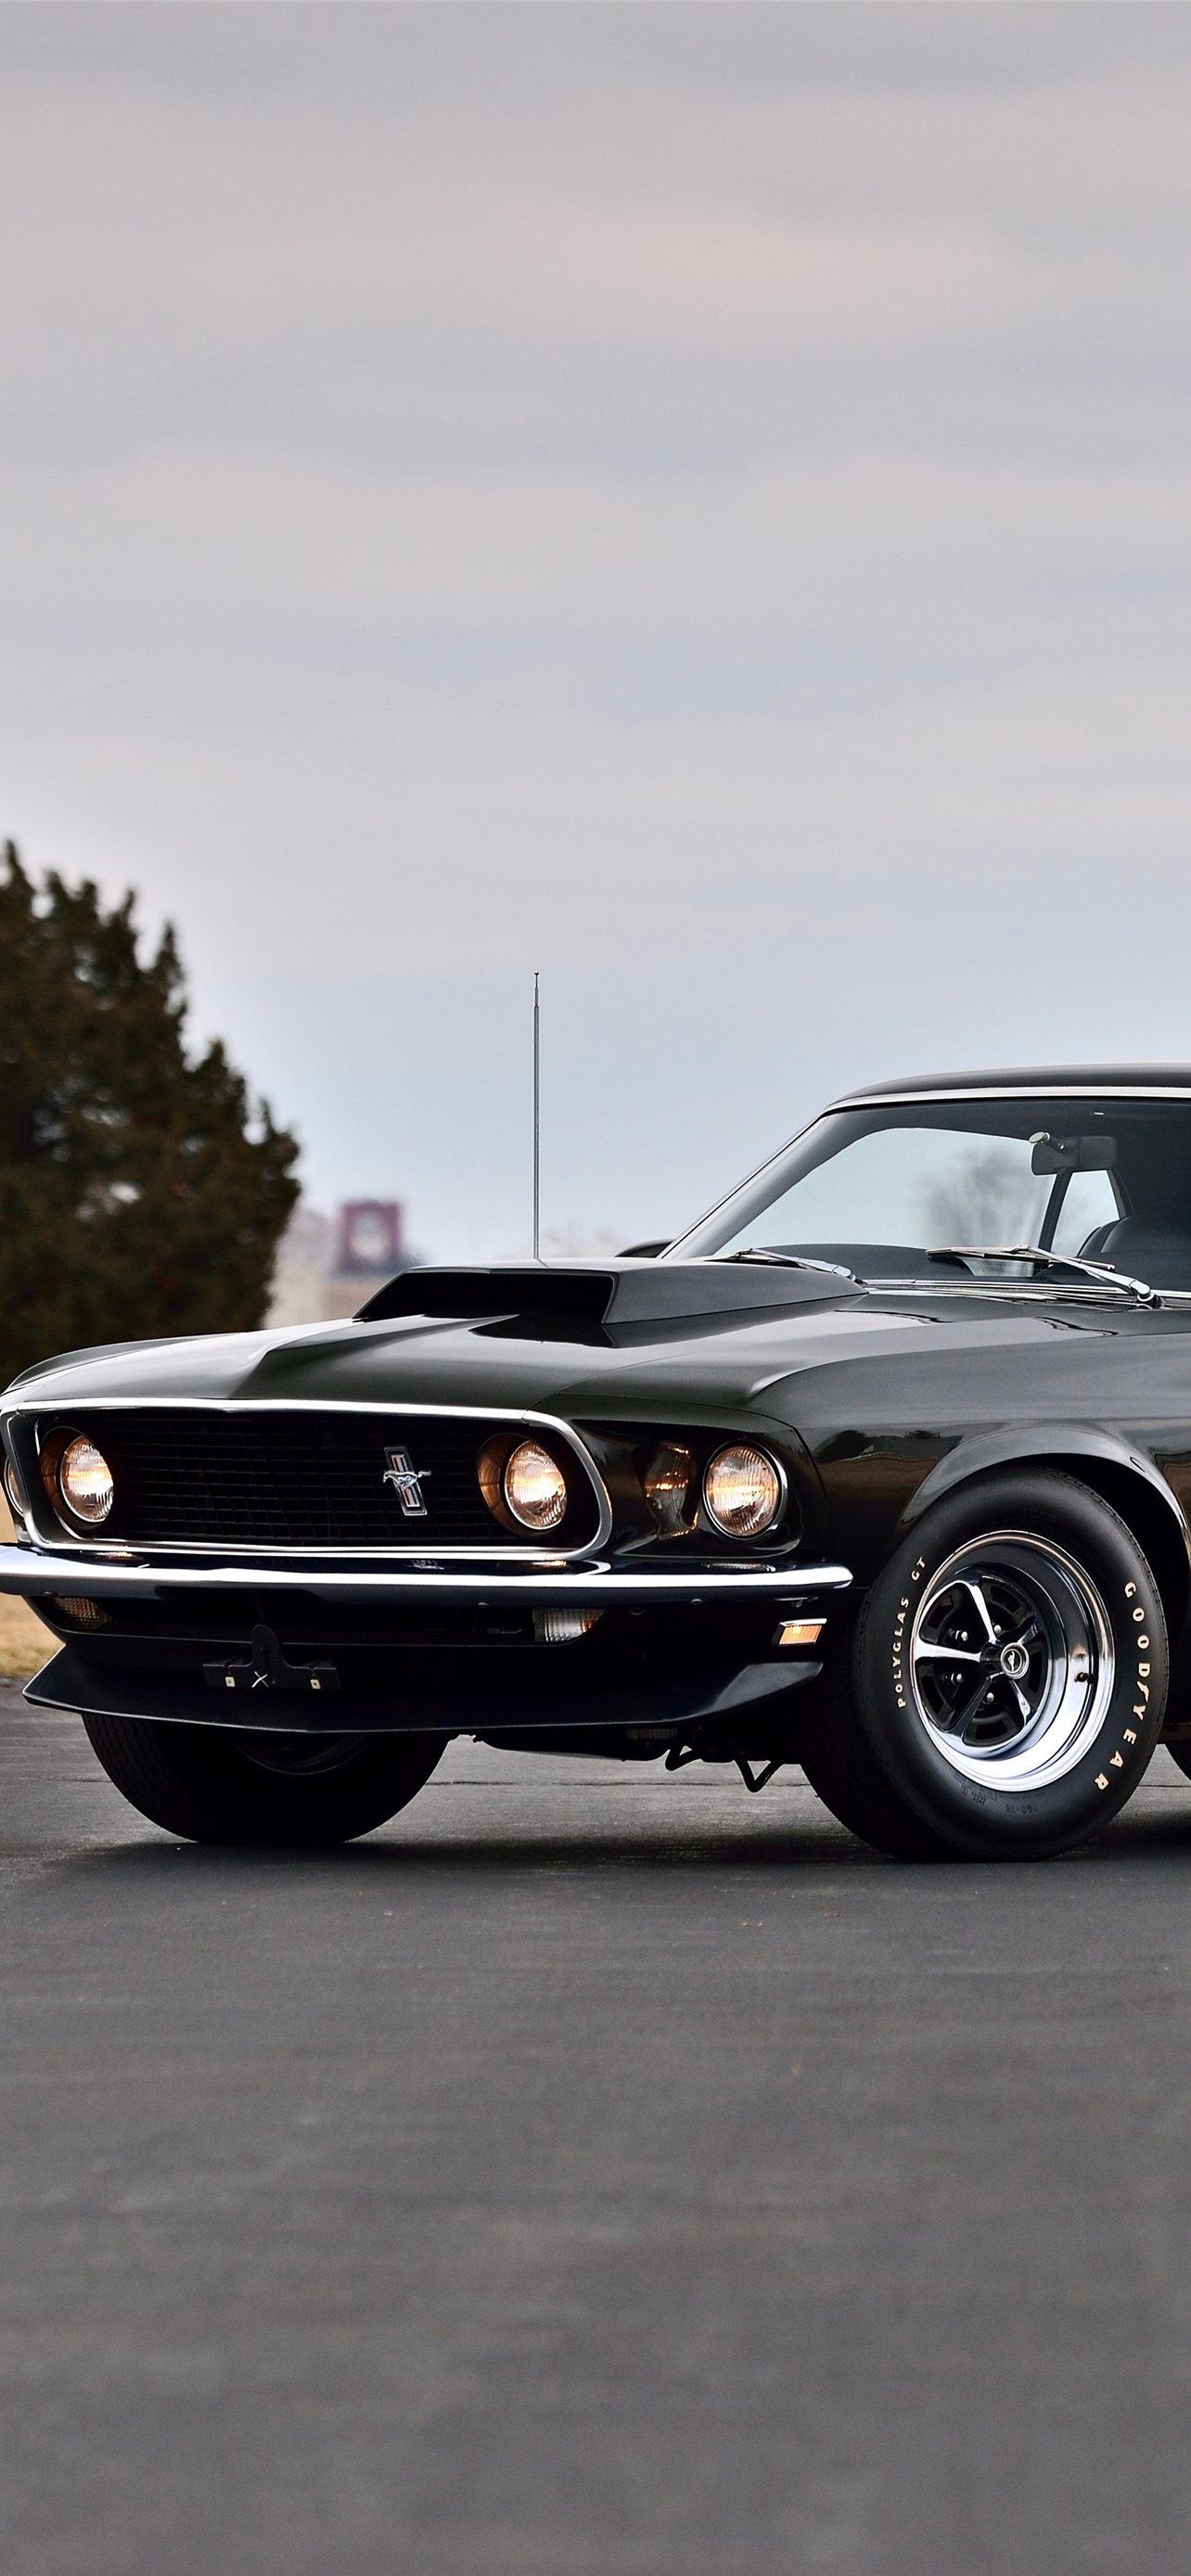 Ford Mustang Boss 429 Fastback Muscle Car Sony Xpe... iPhone wallpaper 